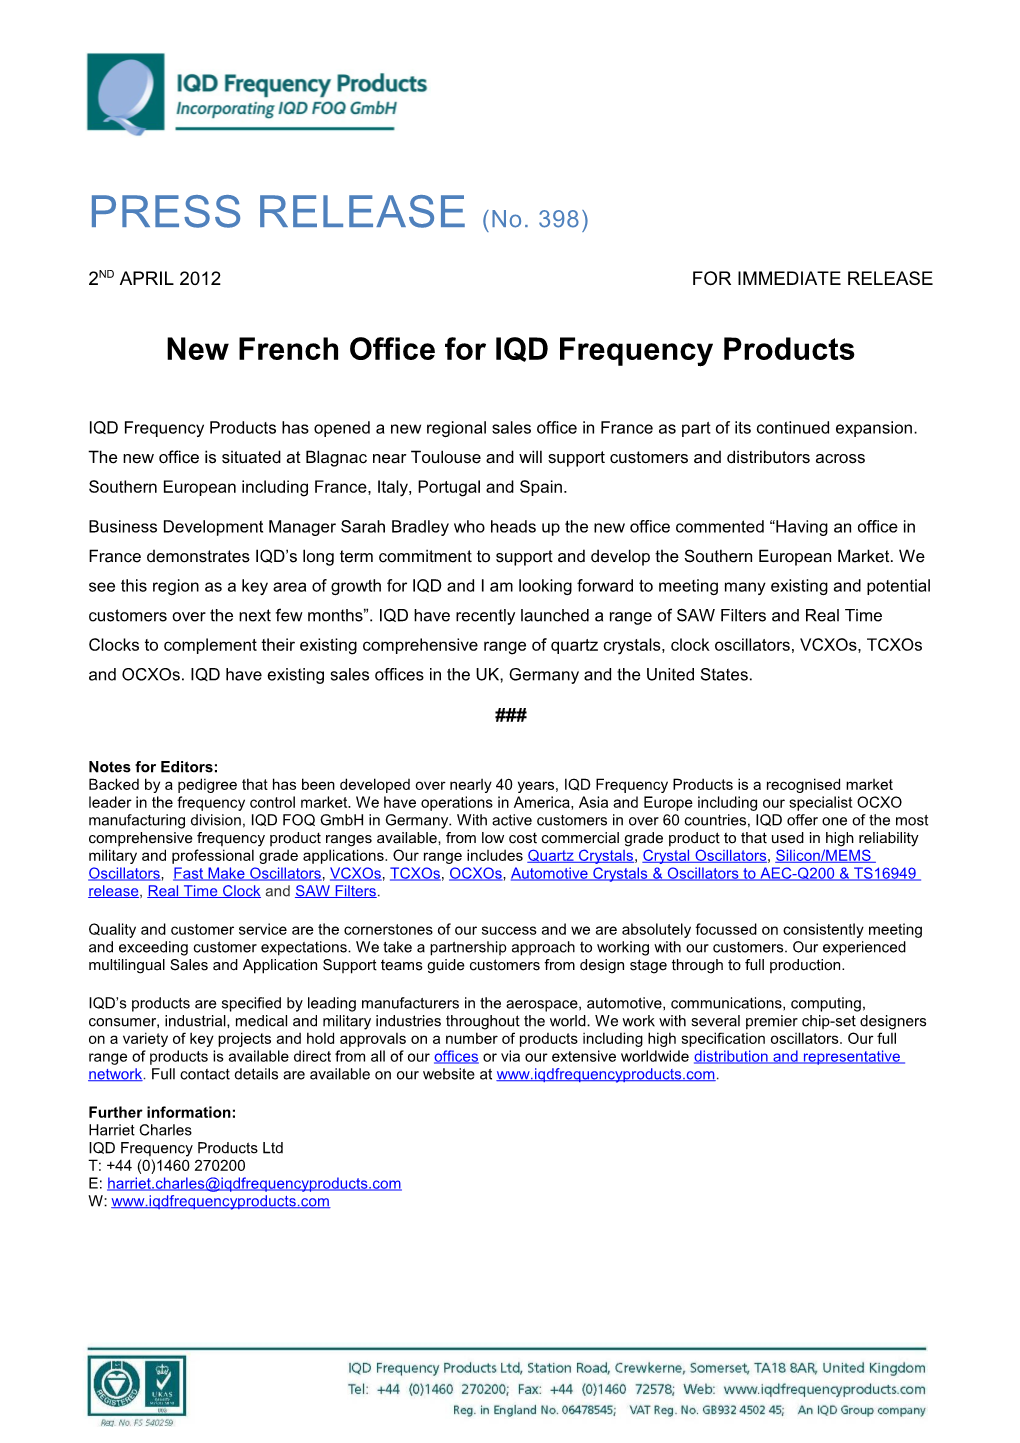 New French Office for IQD Frequency Products